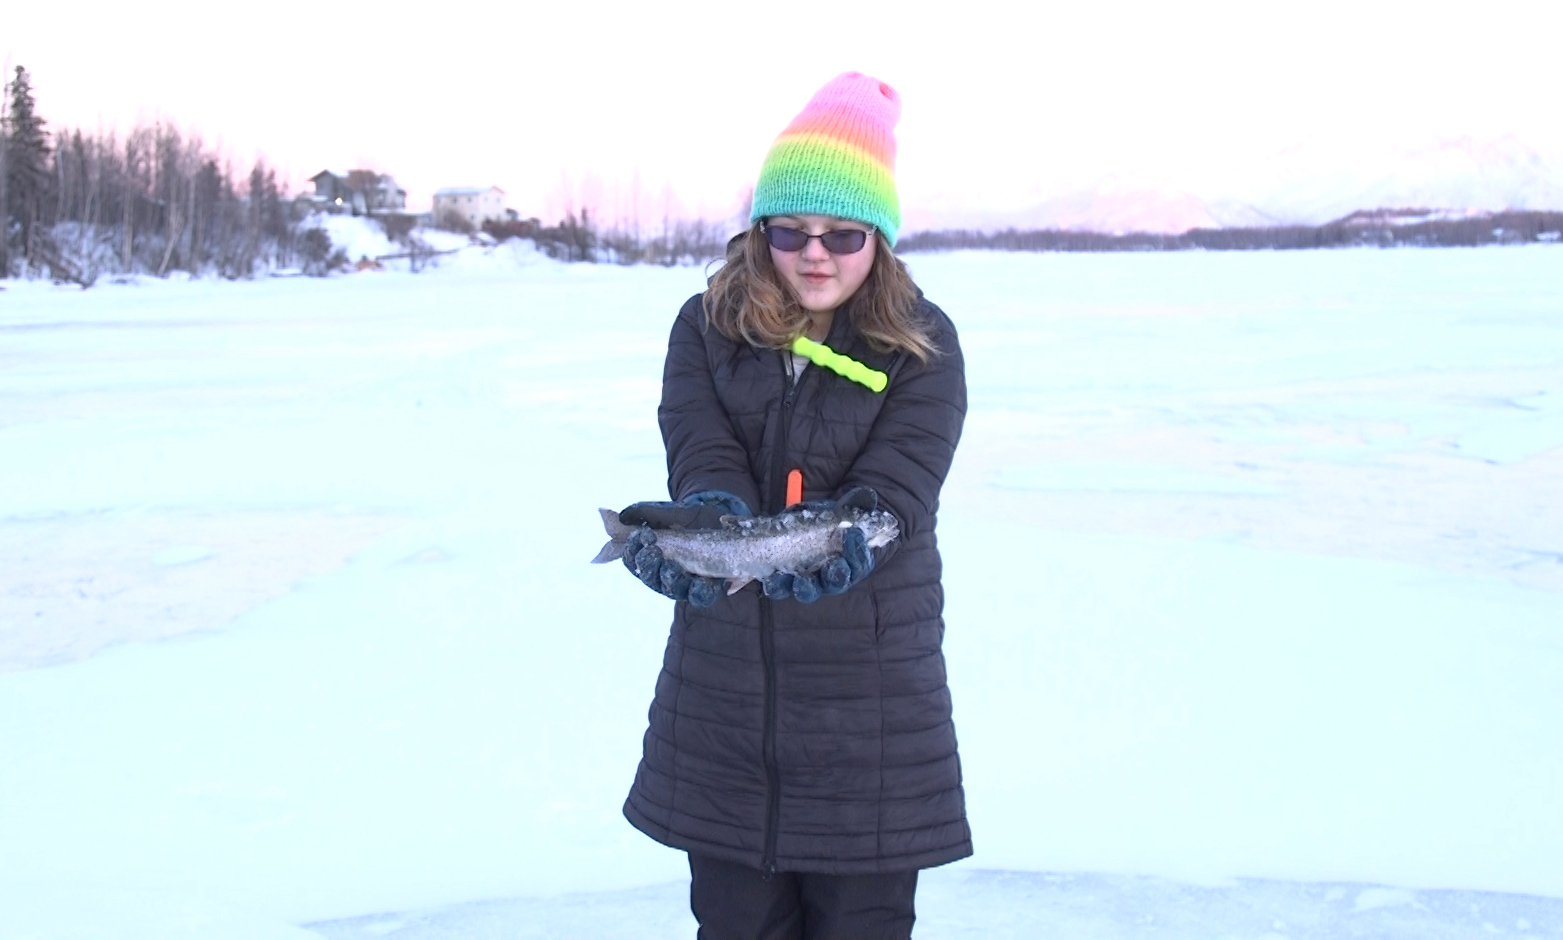 A middle school student proudly displays the fish she caught ice fishing on Wasilla Lake.